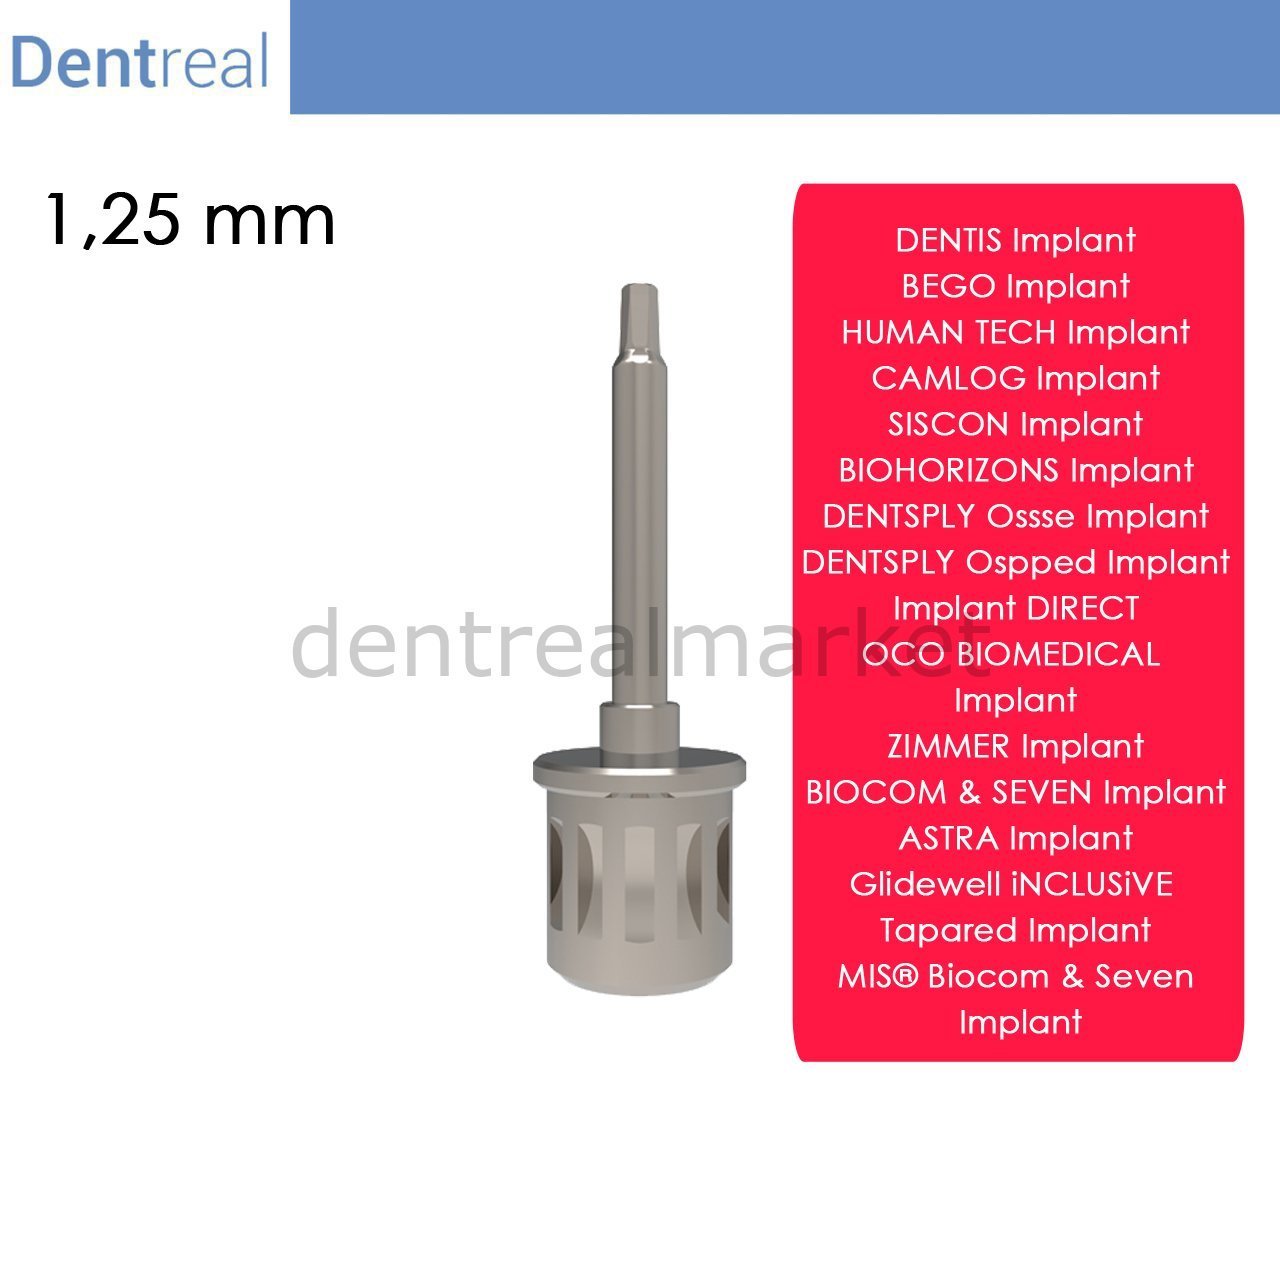 DentrealStore - Dentreal Screwdriver for Ospped Implant - 1,25 mm Hex Driver